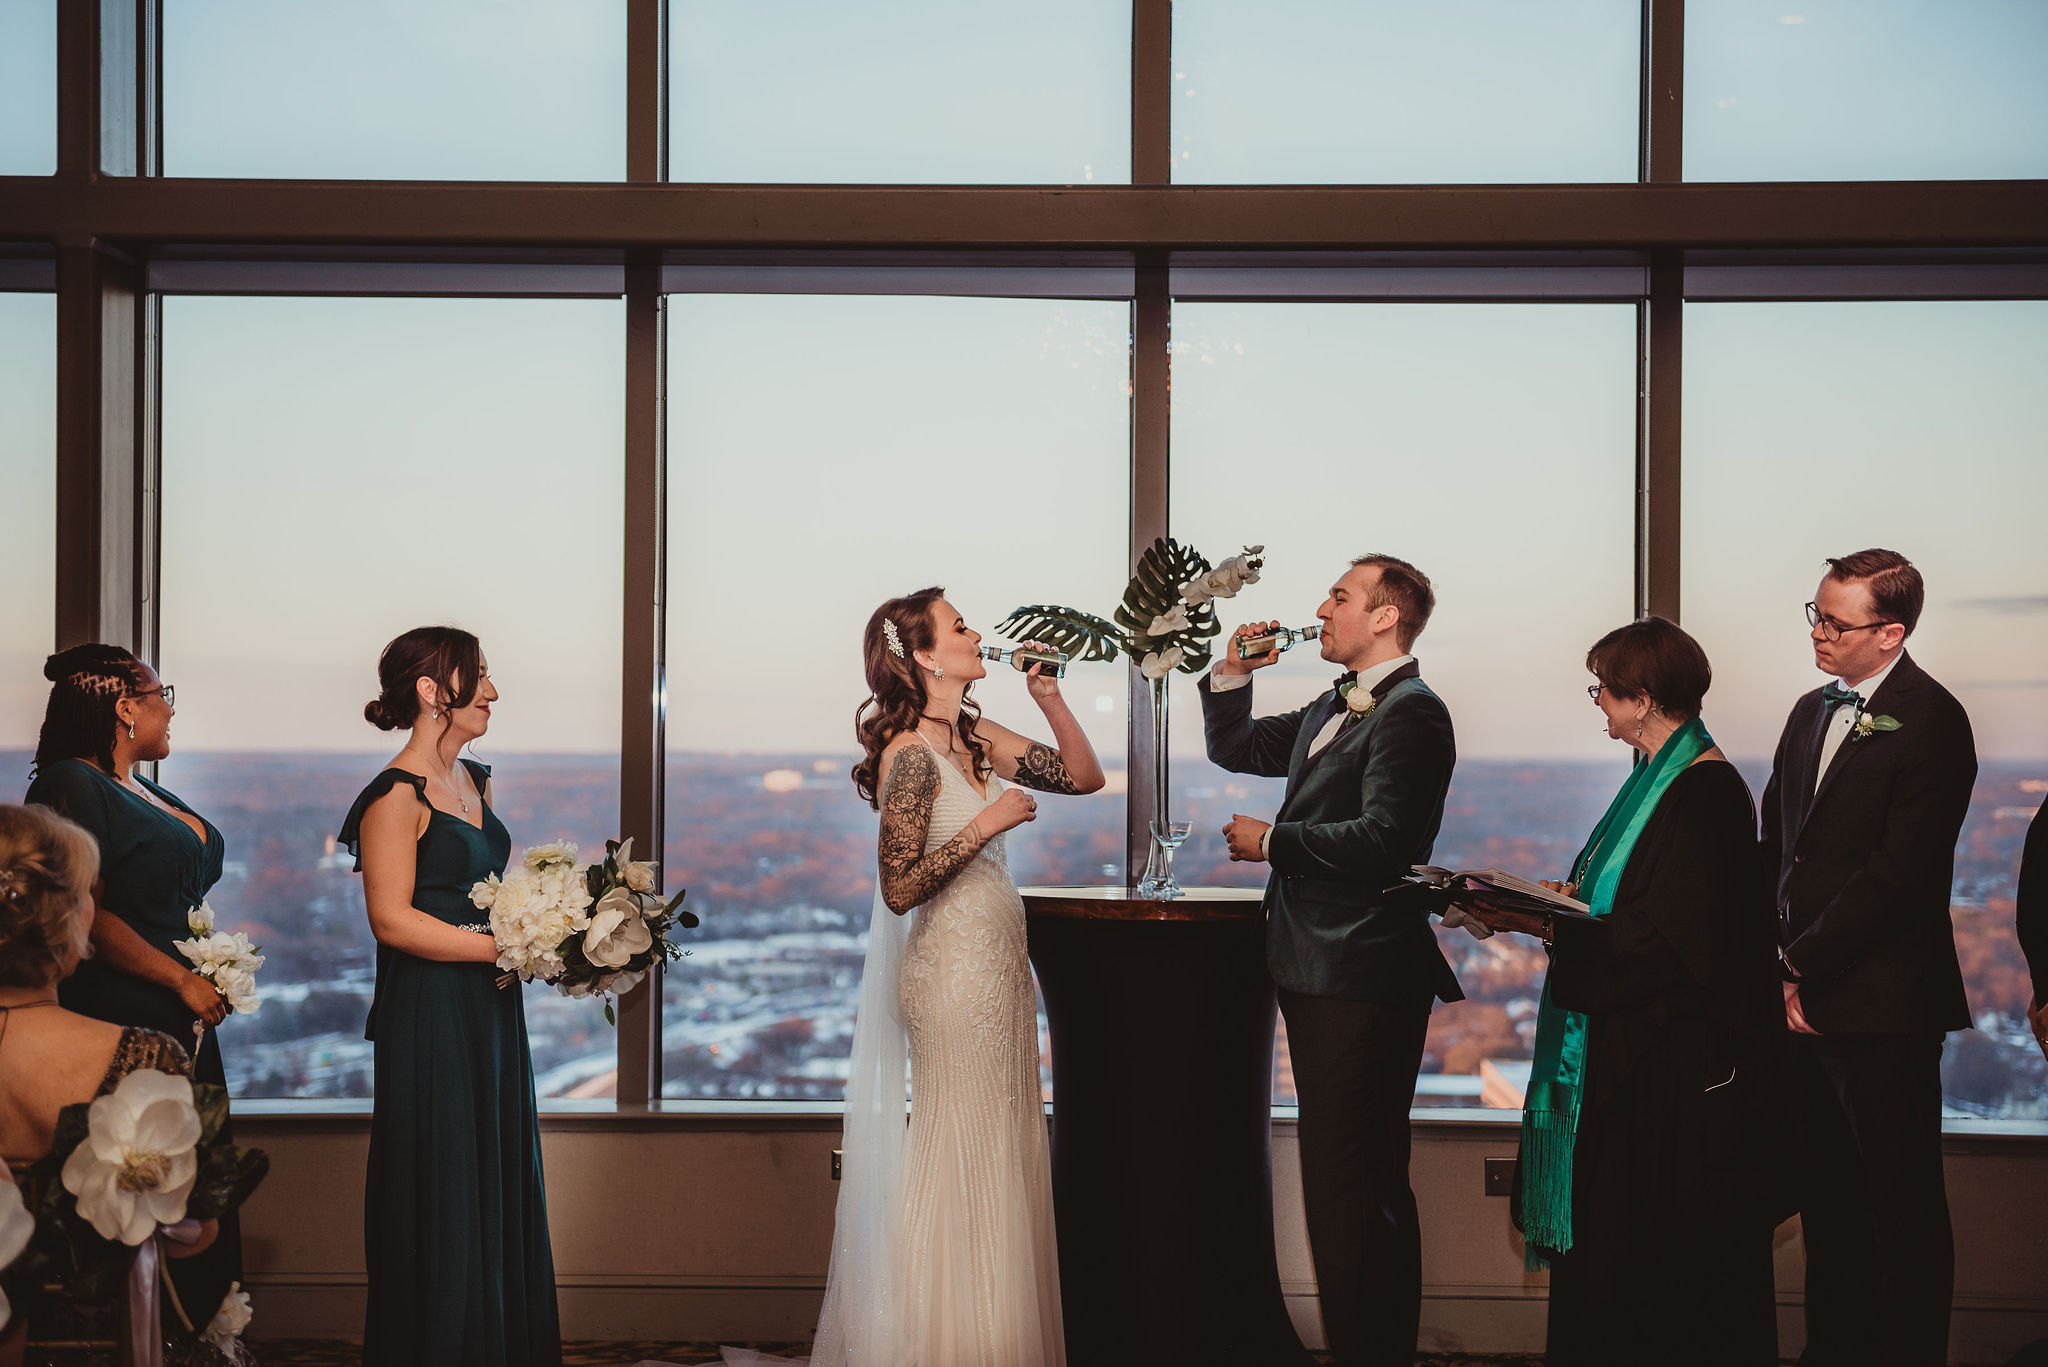 A bride and groom drink together while their wedding party watches.